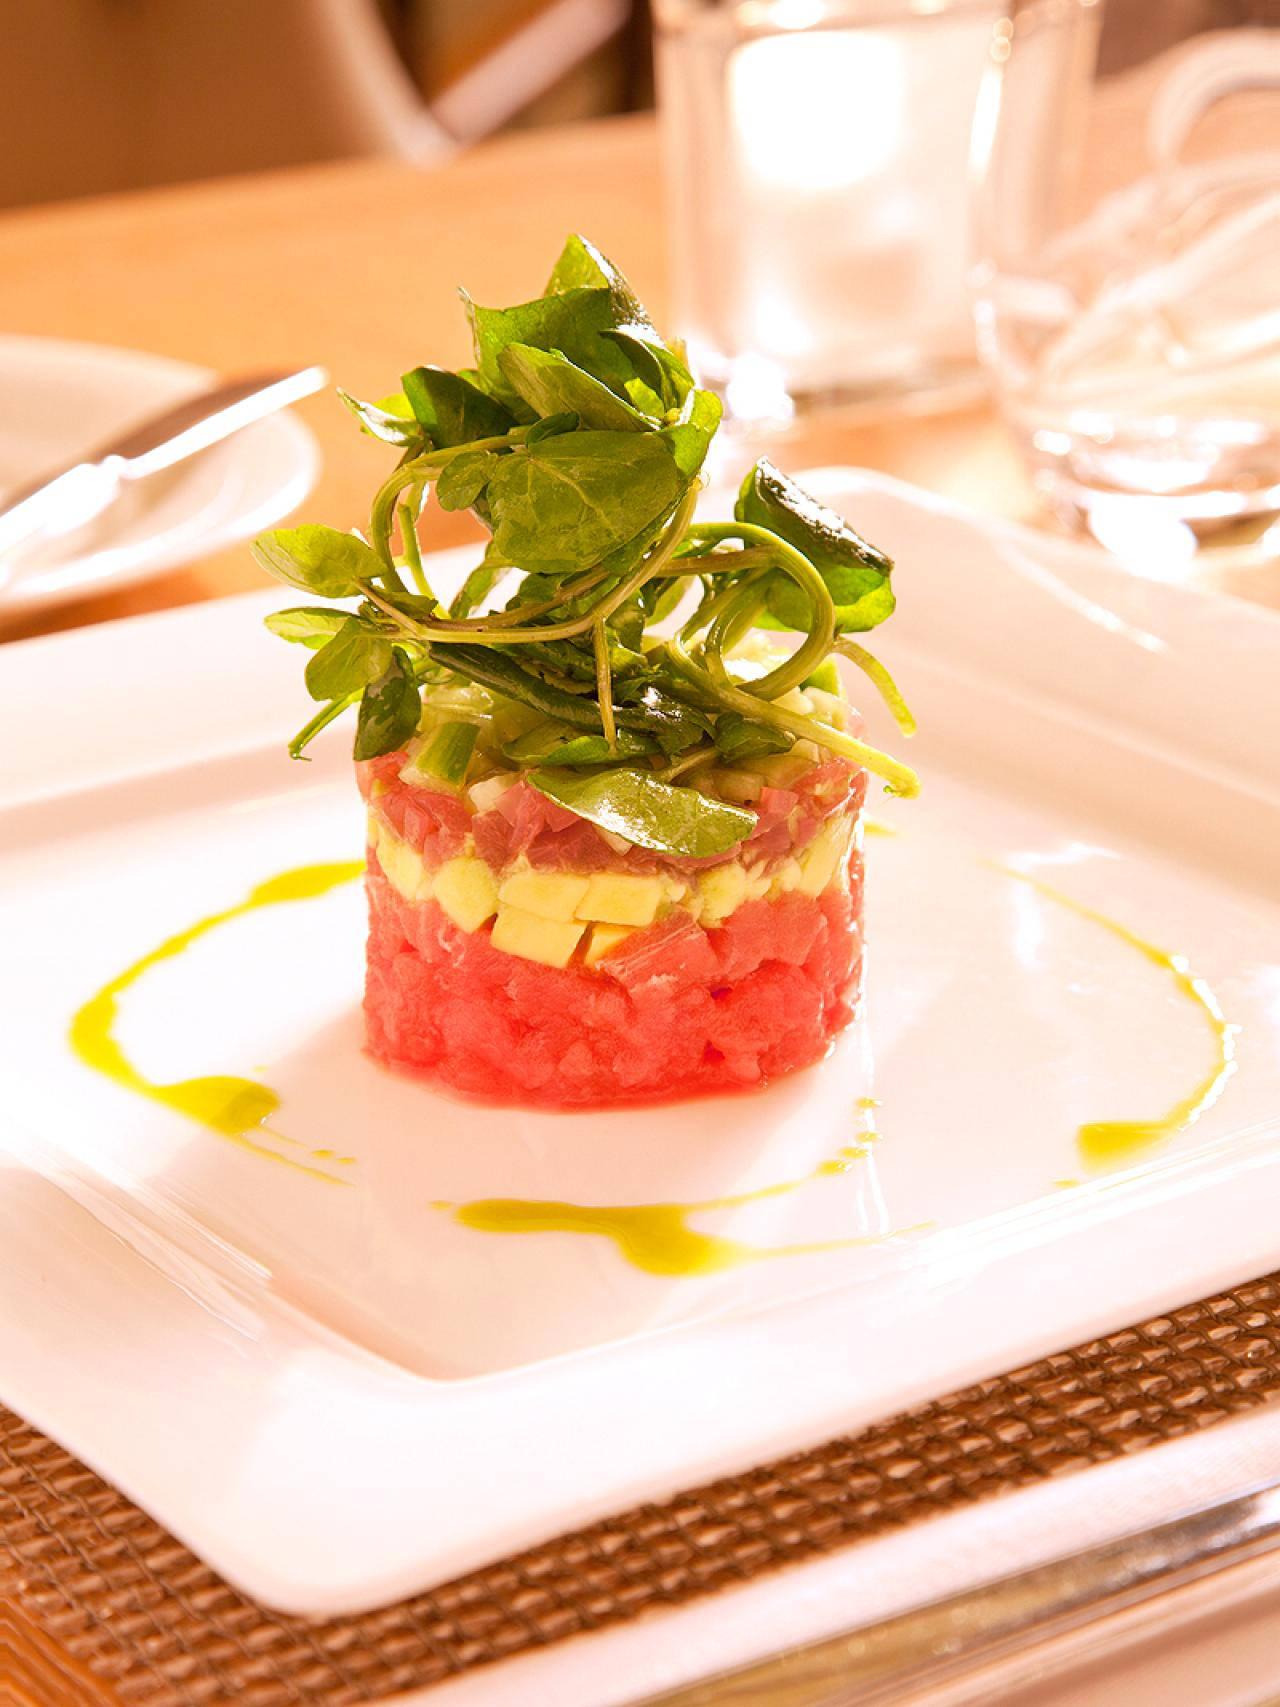 Tunasteak Tartare Is Not Related To Computer Or Mobile Wallpapers. However, If You Meant To Ask Me To Translate Sentences Related To Computer Or Mobile Wallpapers Into German, Please Let Me Know And Provide The Sentences You Would Like Me To Translate. Wallpaper